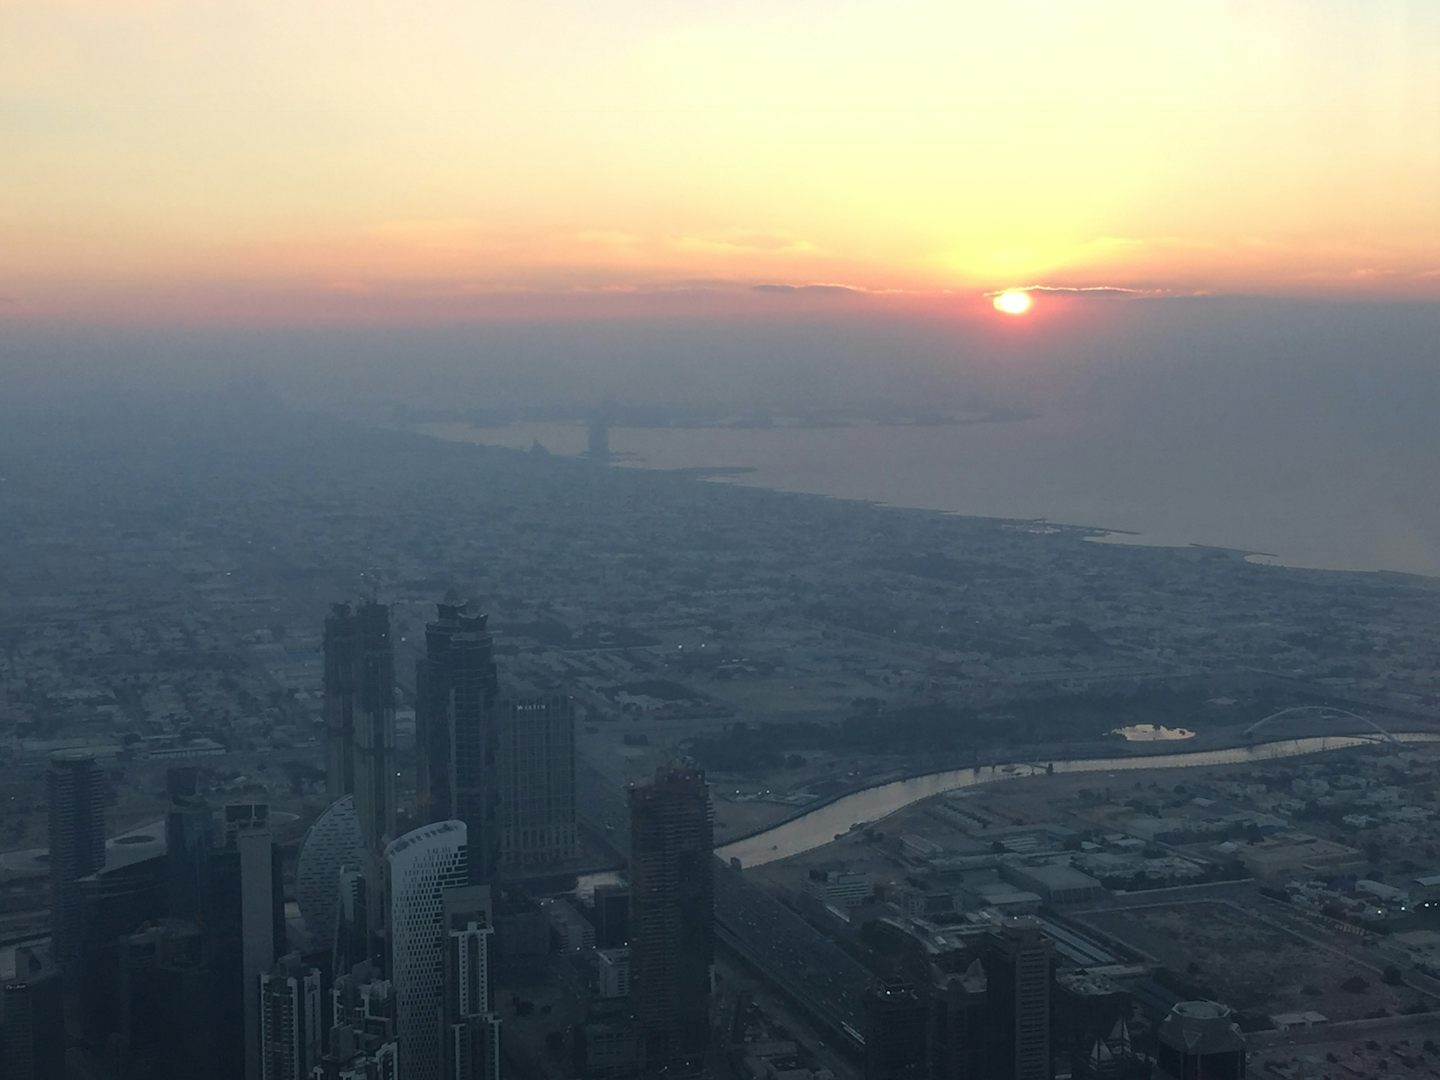 Sunset from At the Top Sky at the burj kalifa